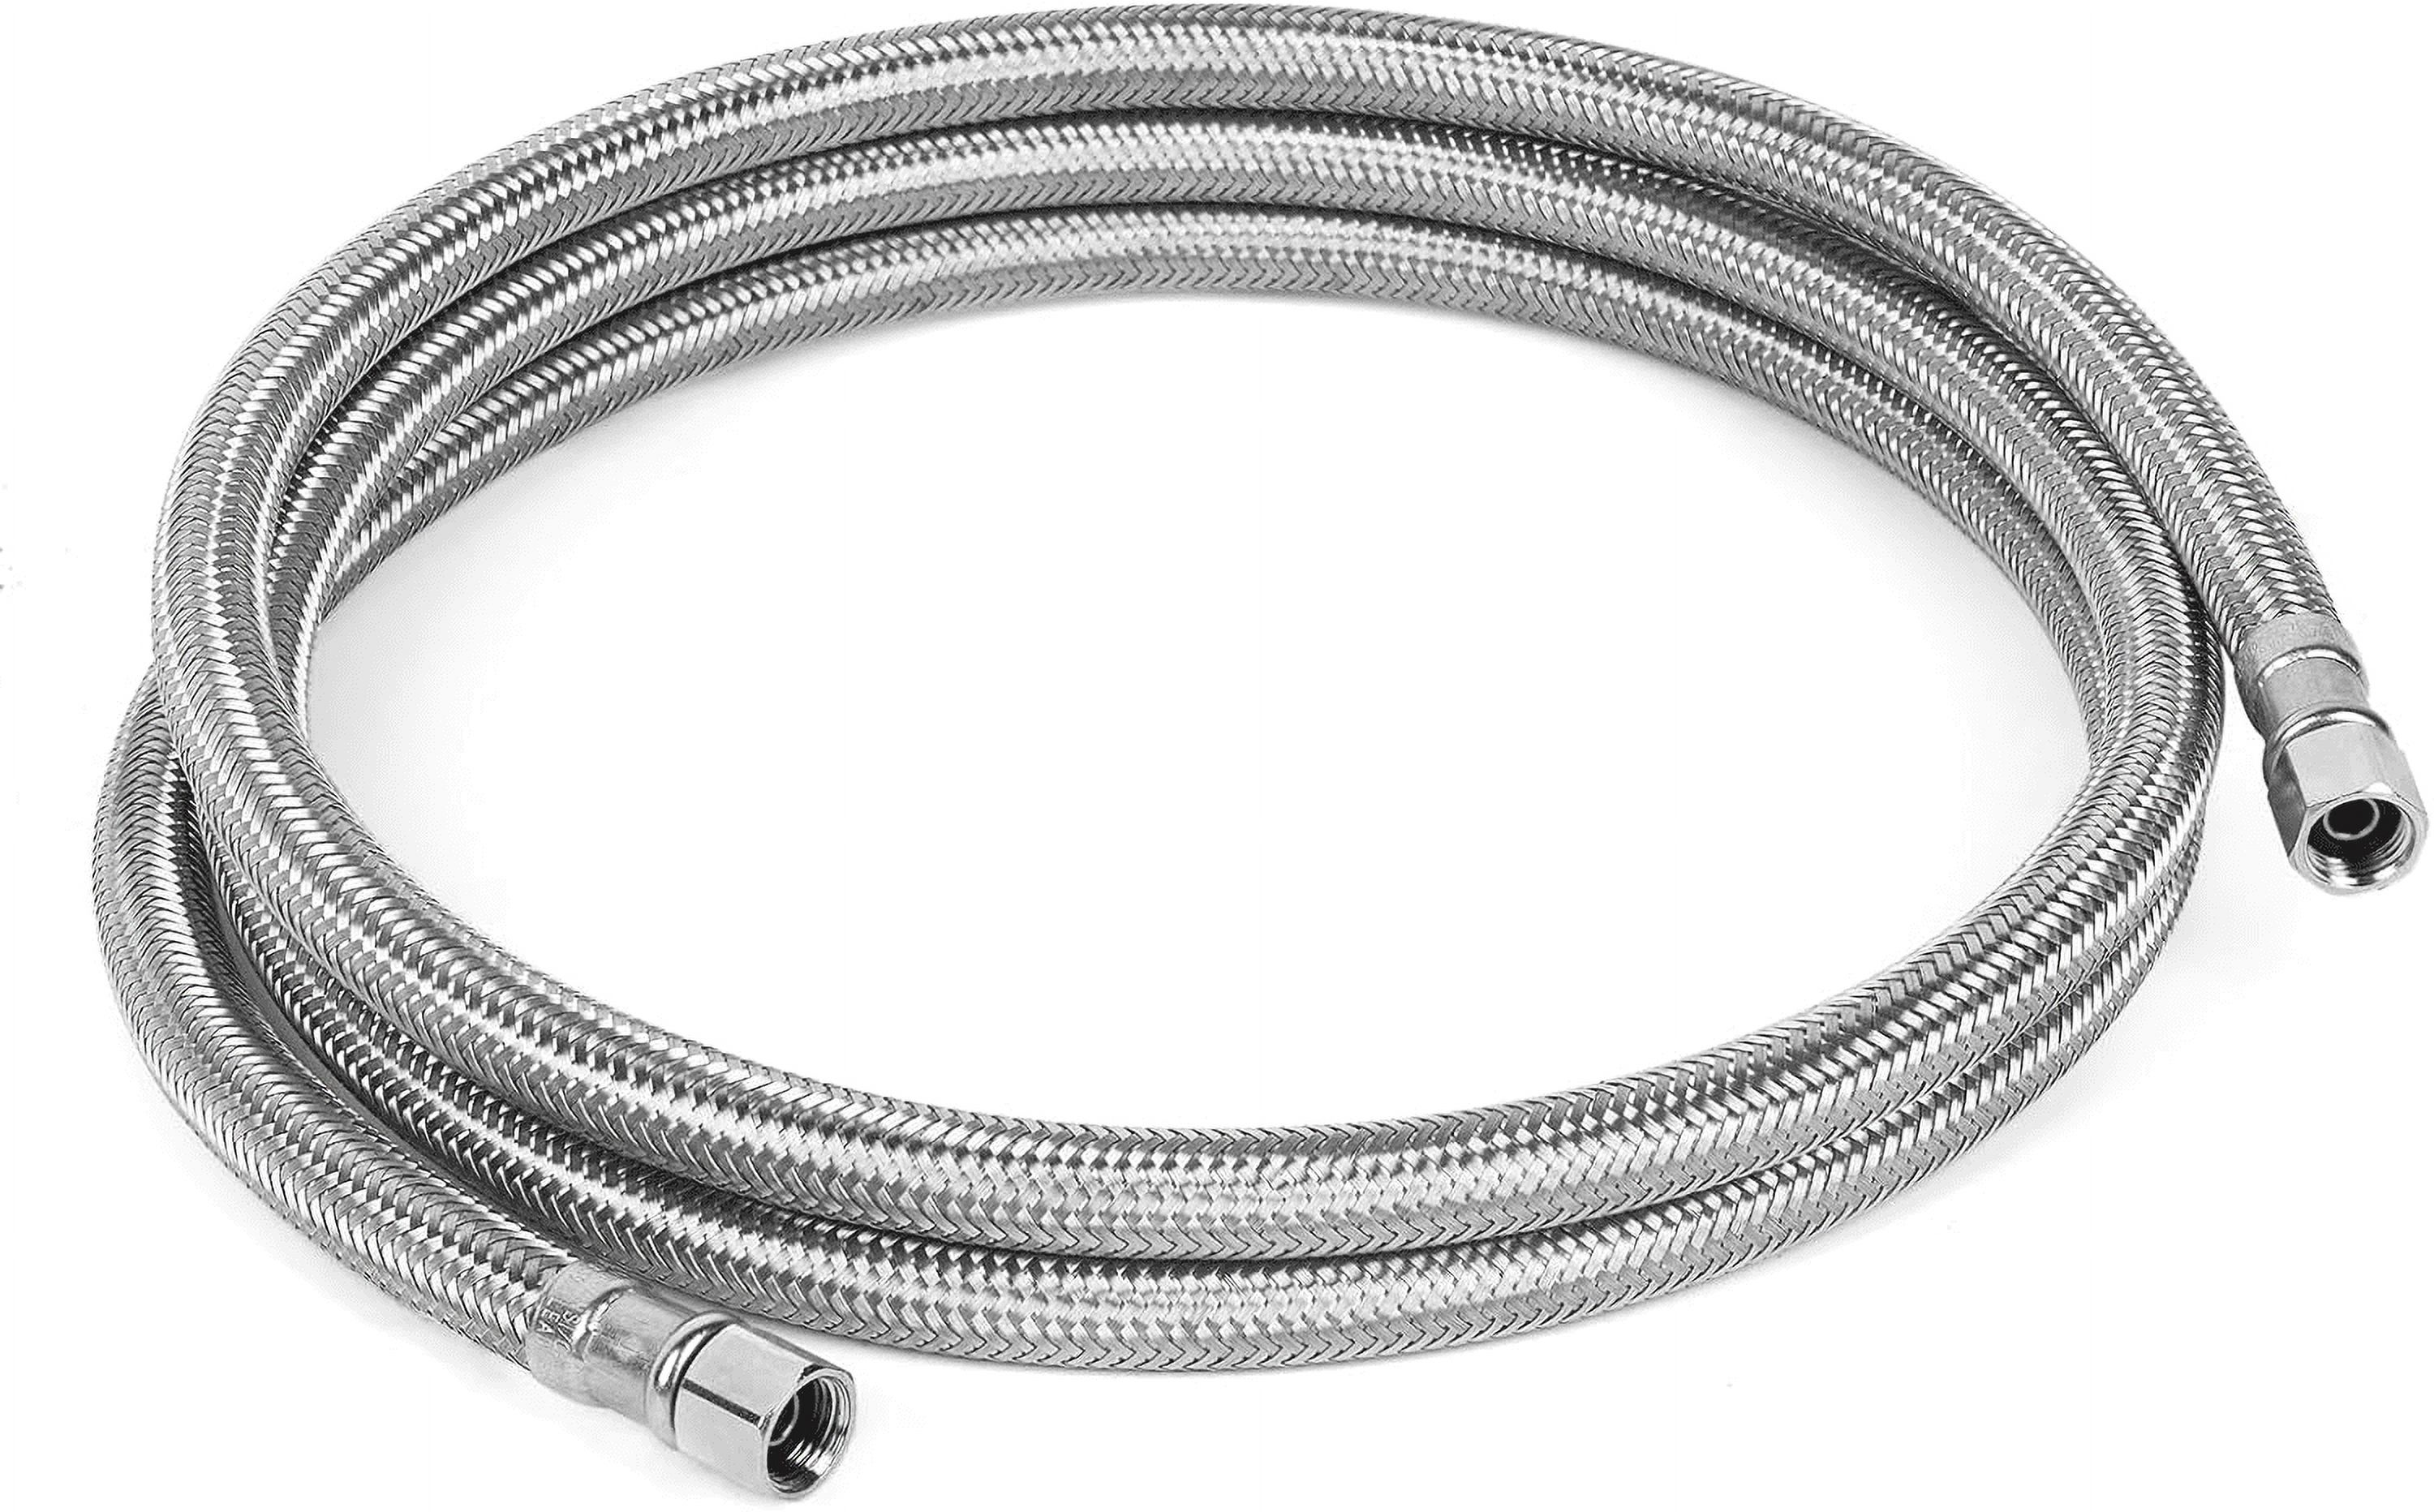 6 ft Refrigerator Water Ice Maker Supply Line, 1/4 inch Compression Stainless Steel Ice Maker Hose Connector, for Small Residences with Short Distance